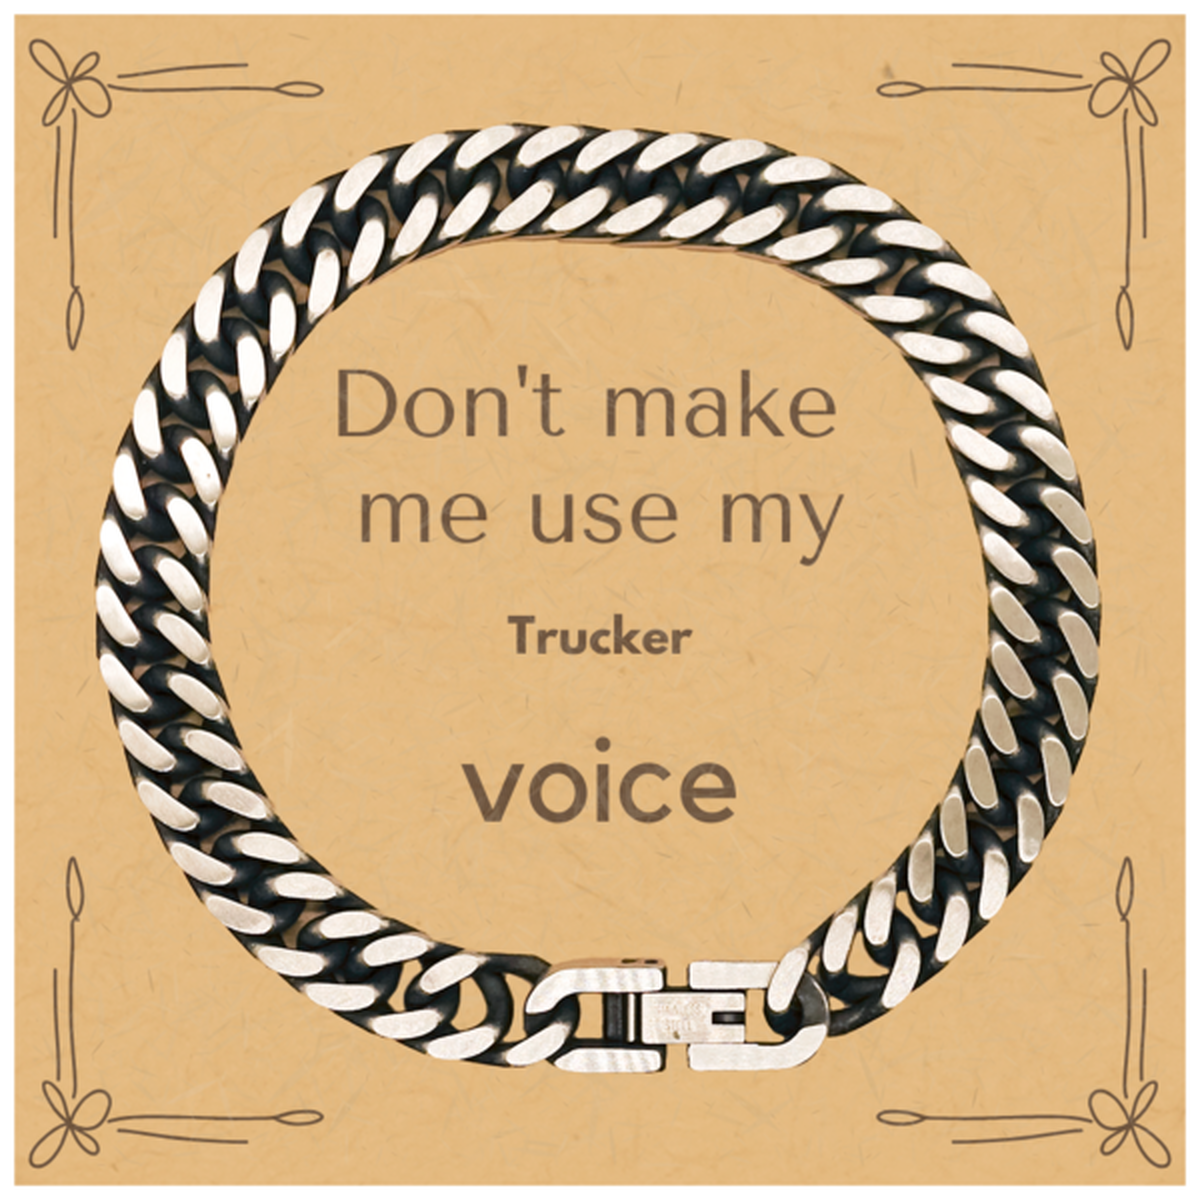 Don't make me use my Trucker voice, Sarcasm Trucker Card Gifts, Christmas Trucker Cuban Link Chain Bracelet Birthday Unique Gifts For Trucker Coworkers, Men, Women, Colleague, Friends